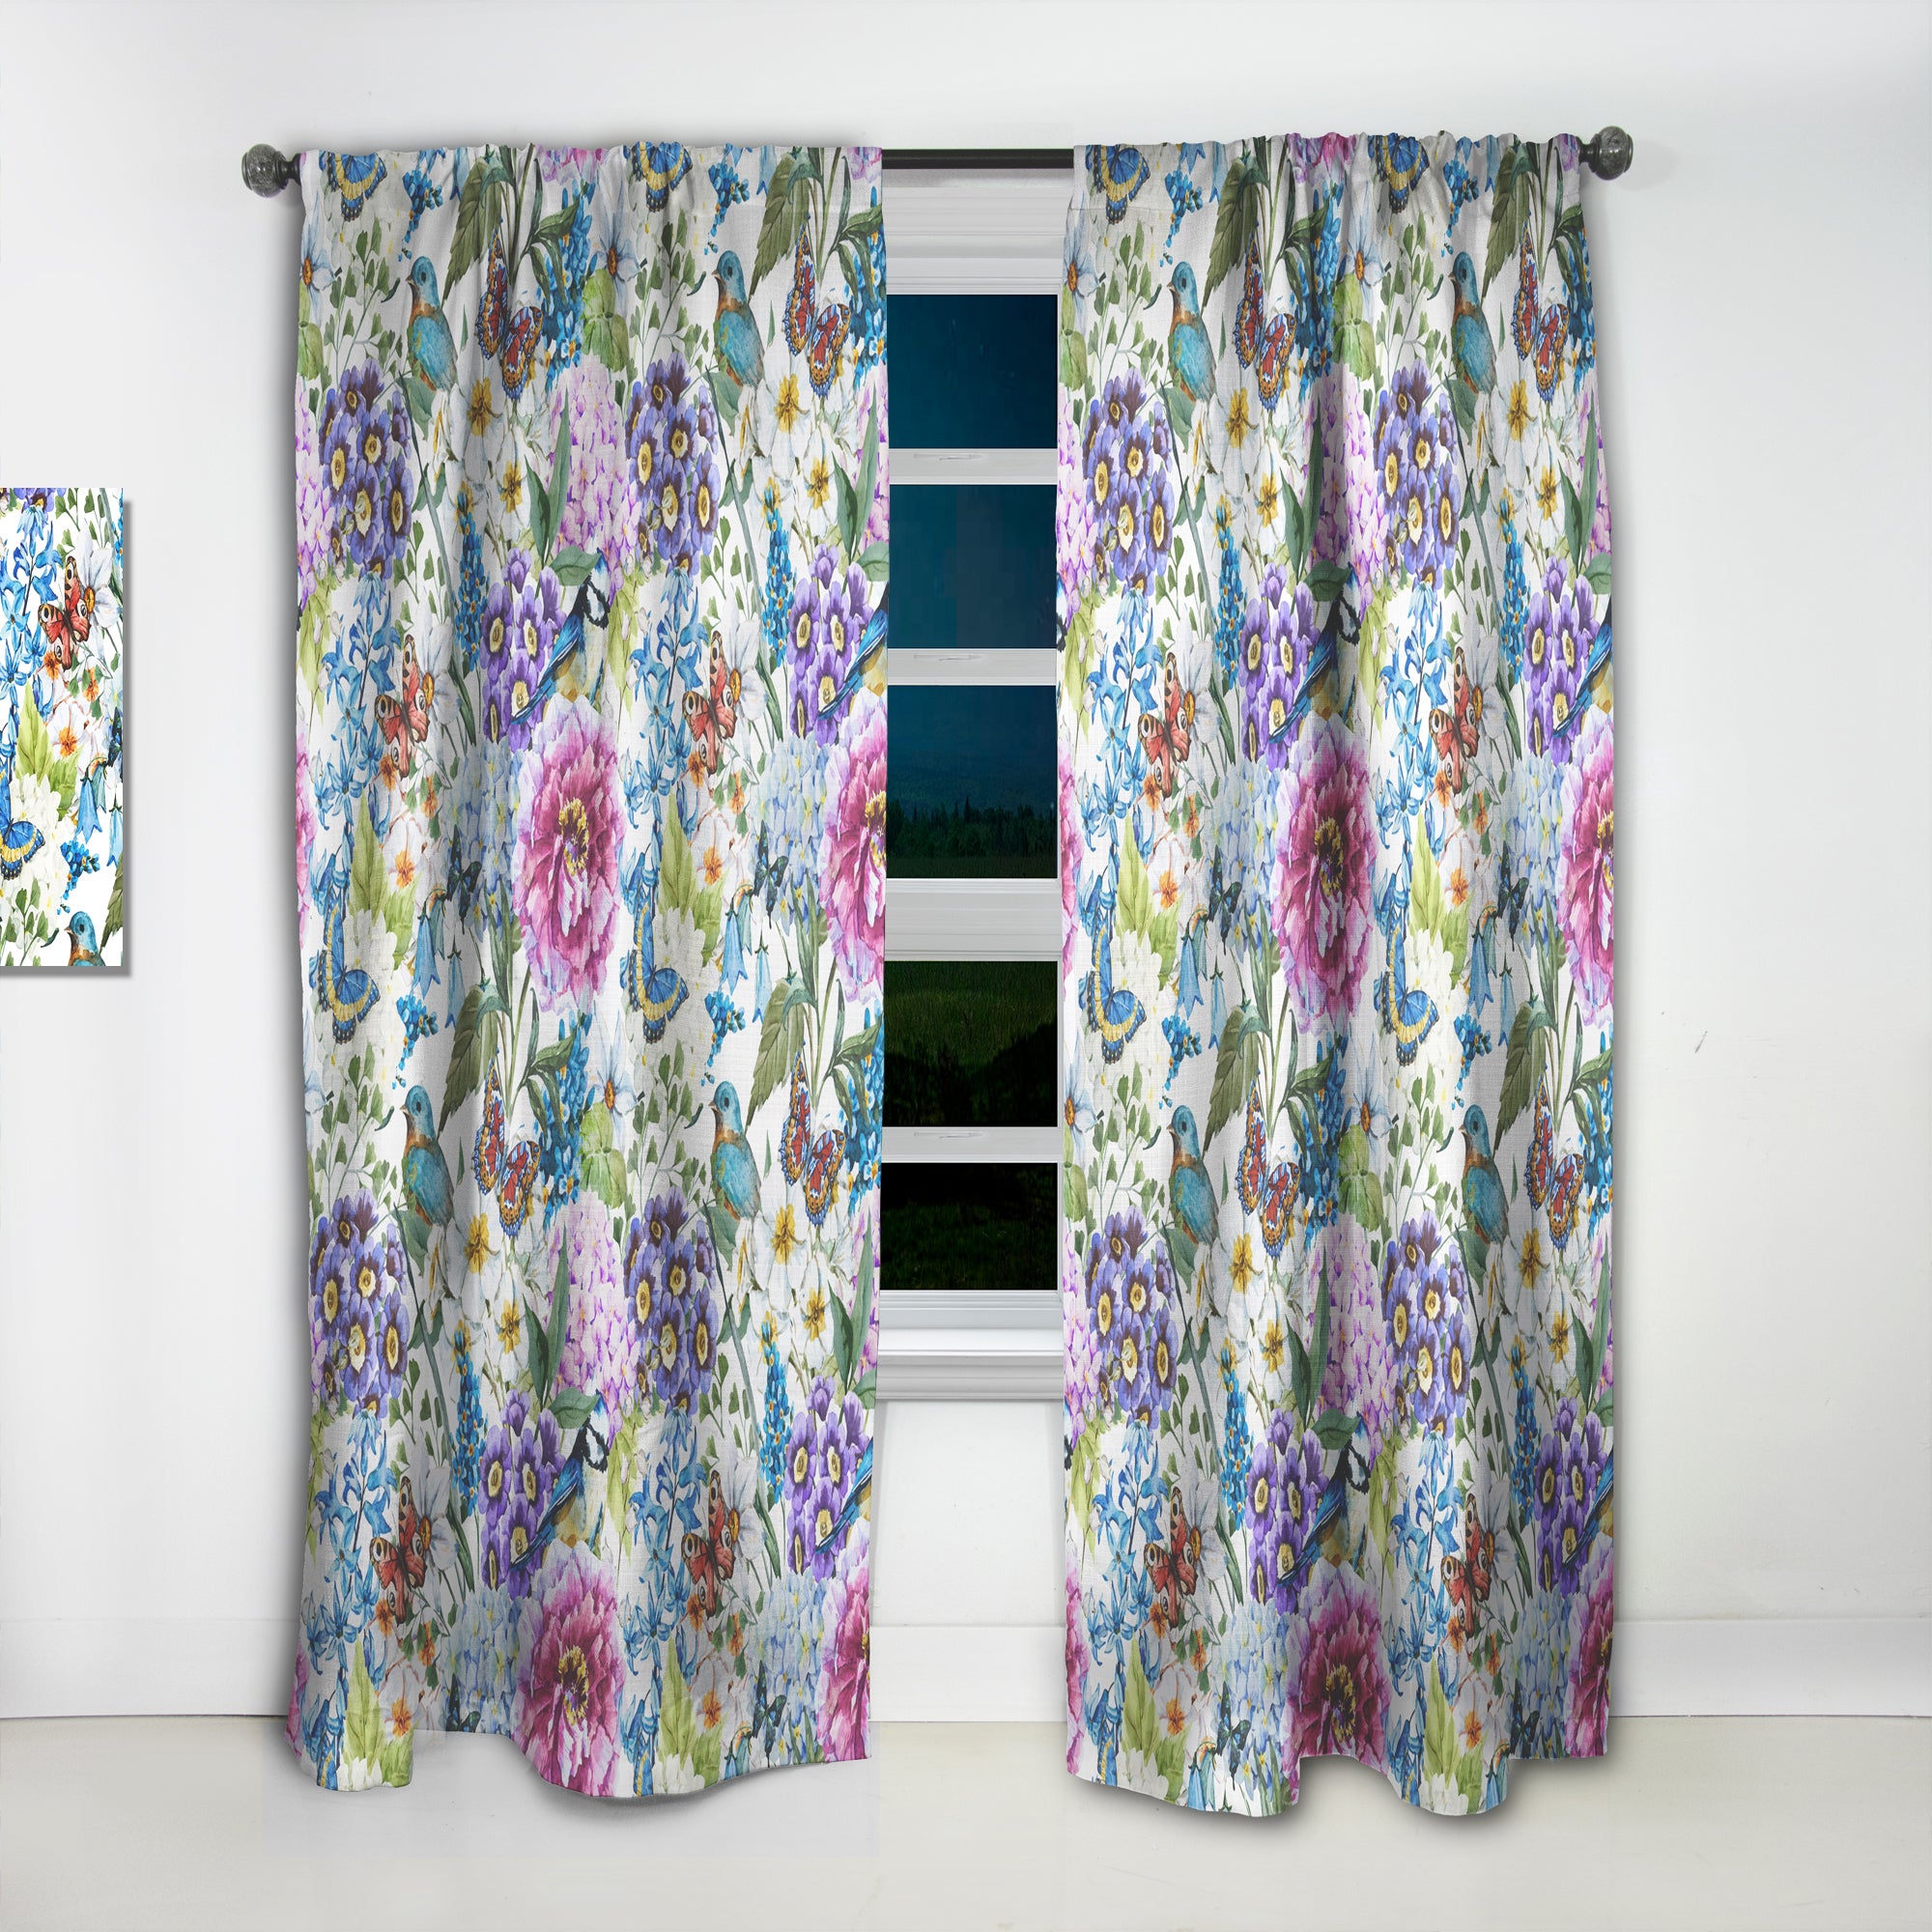 Designart 'Blue Bird And Blue and Purple Blossoming Flowers' Floral Curtain Panel